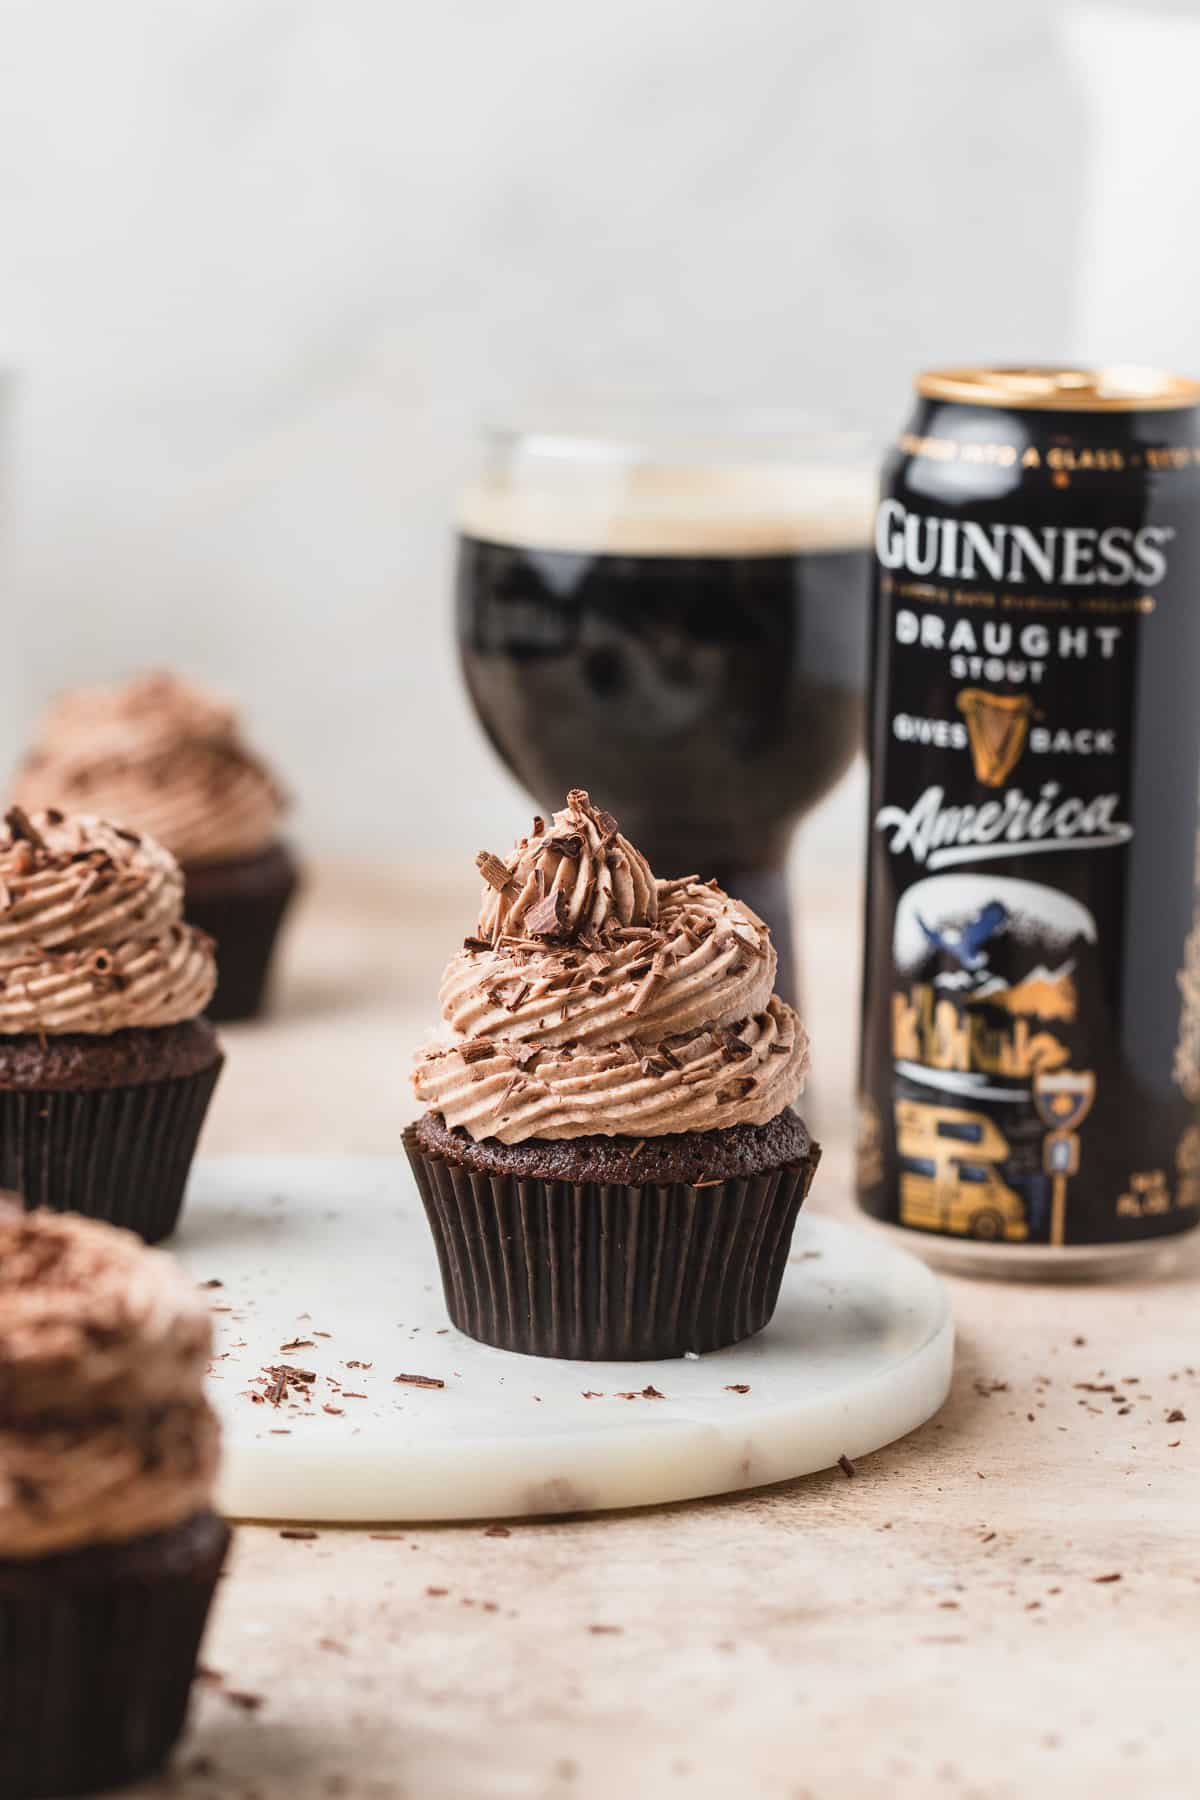 chocolate cupcakes with guinness stout.